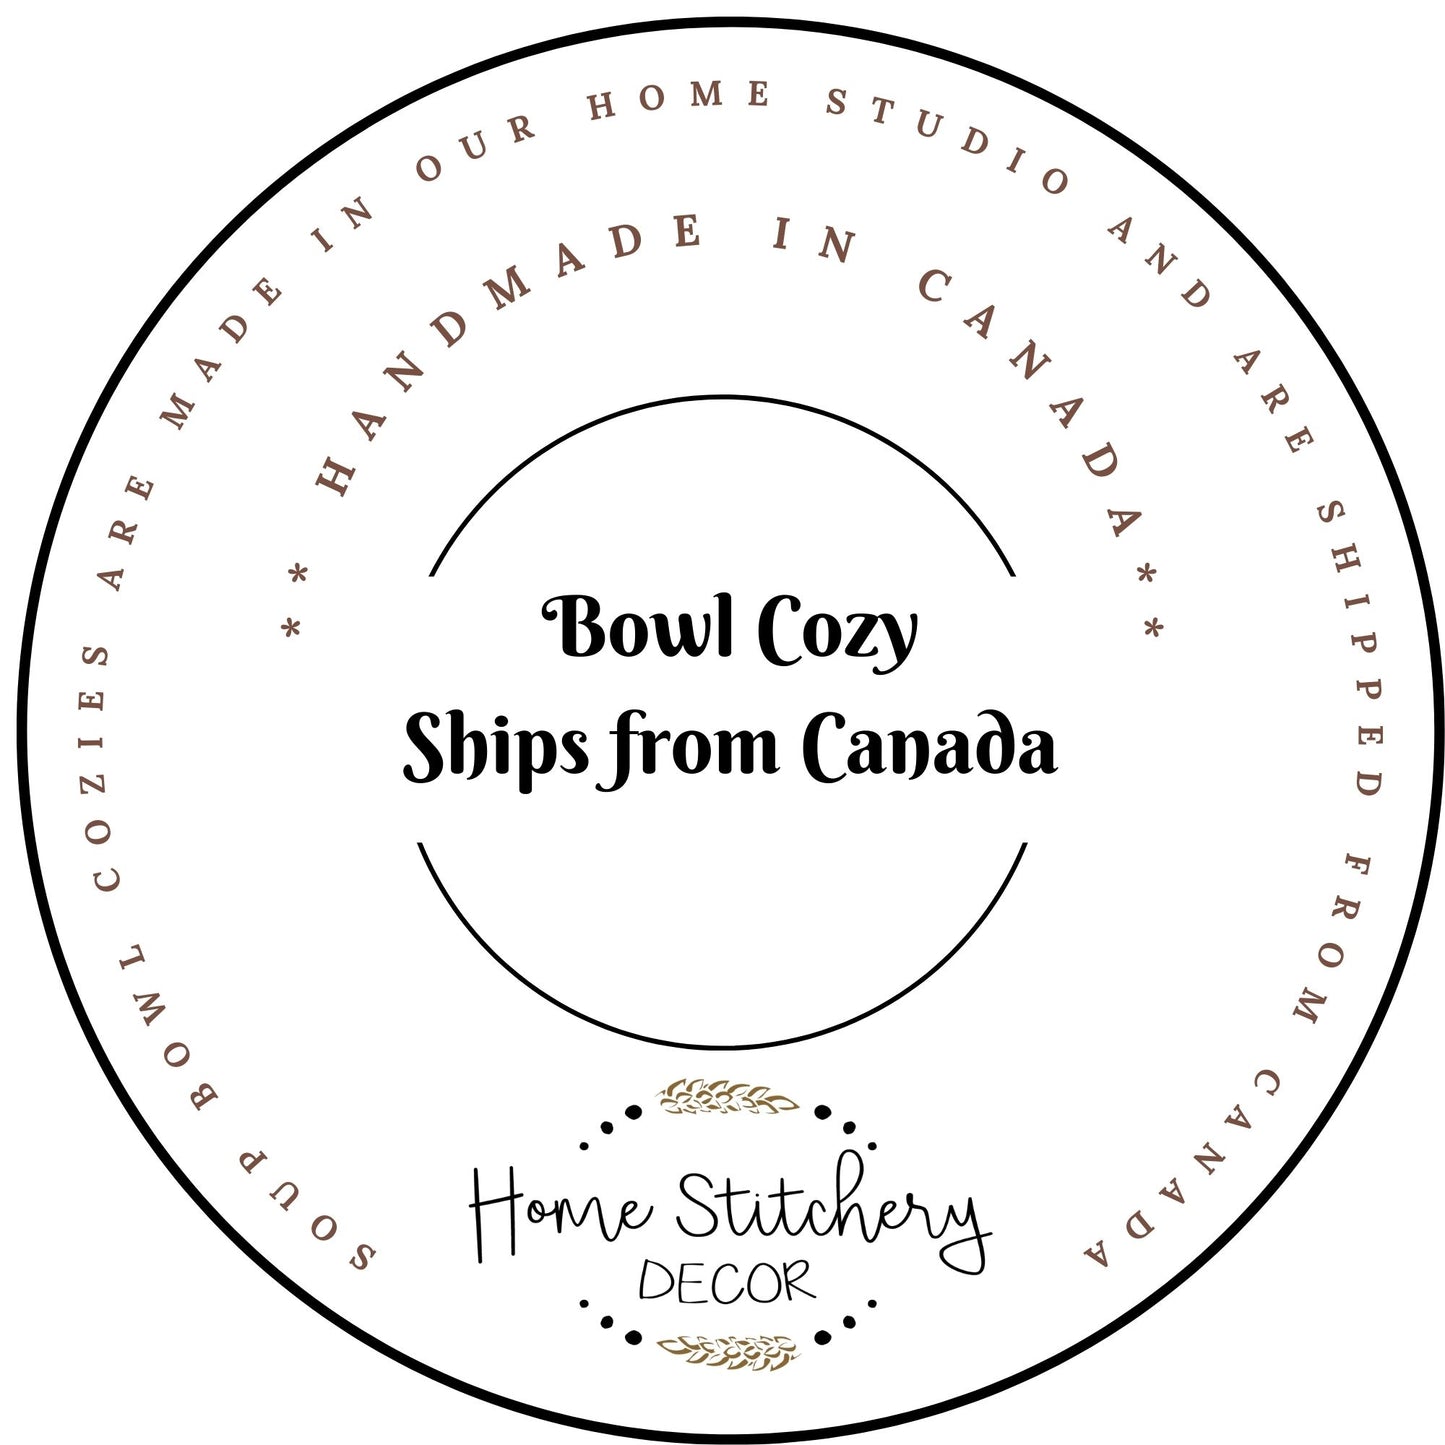 Handmade in Canada your soup bowl cozy ships right from our home studio. 